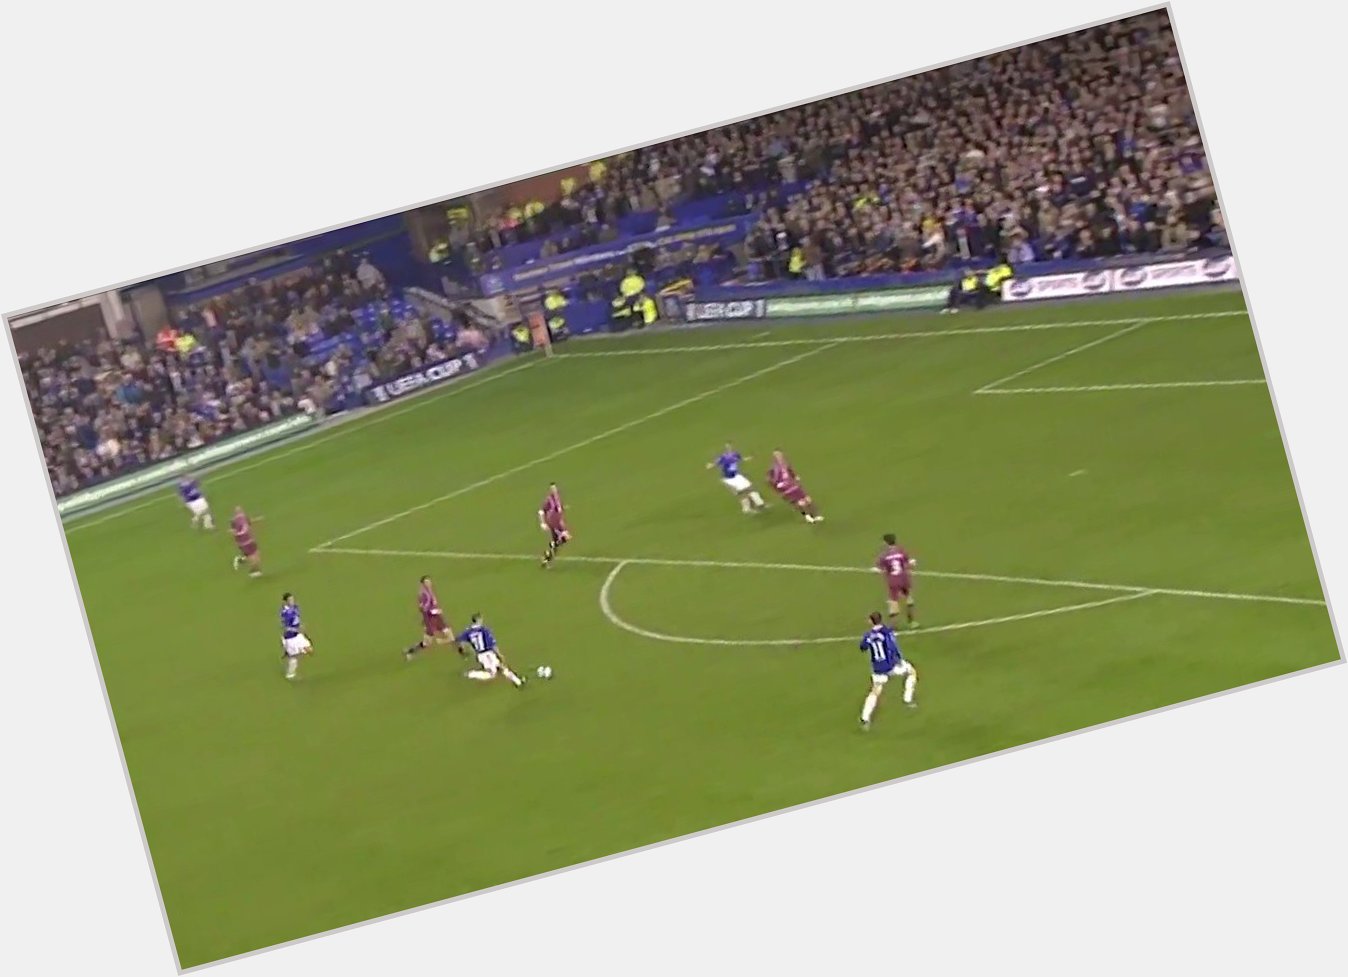 Happy Birthday Leon Osman Over 4  0  0  appearances for Everton

Oh, and this goal:

